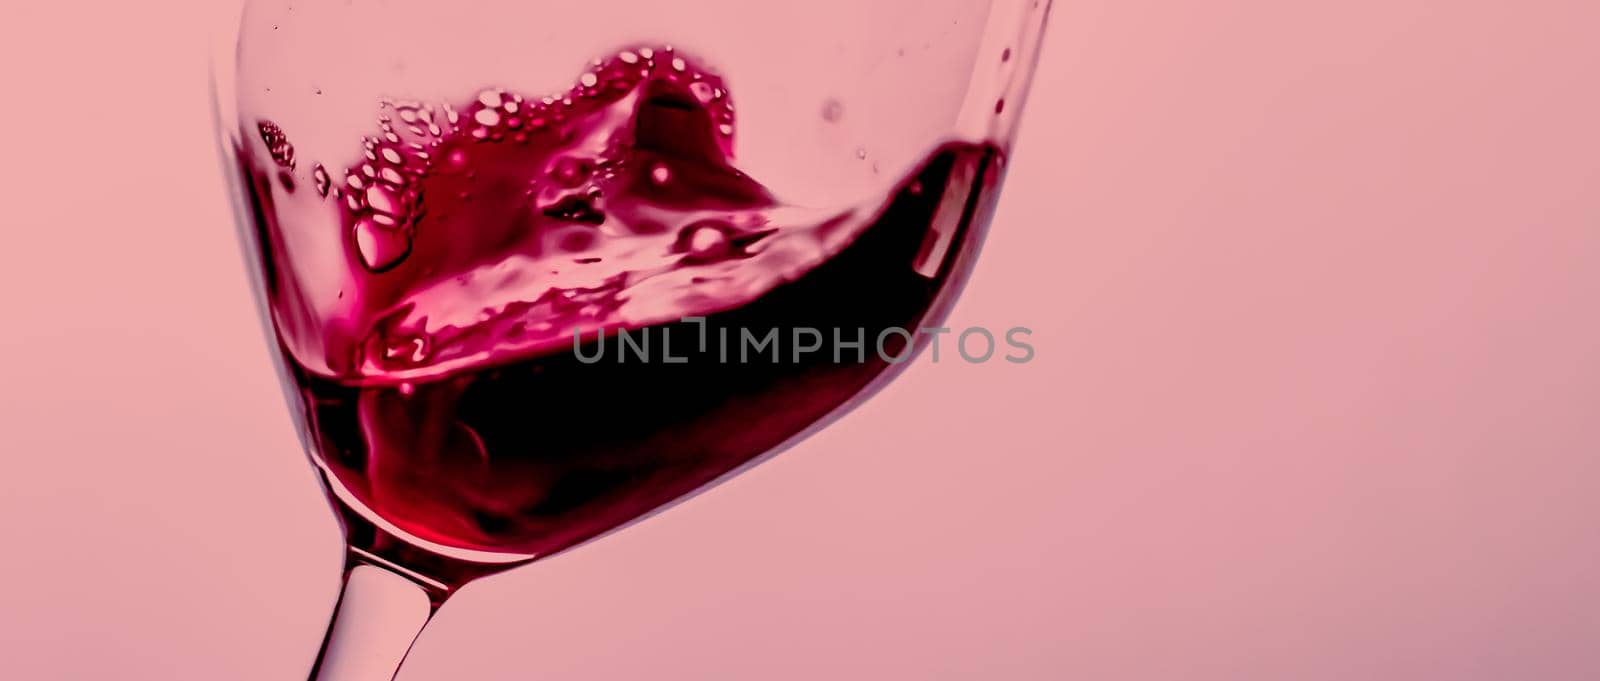 Red wine in crystal glass, alcohol drink and luxury aperitif, oenology and viticulture product.